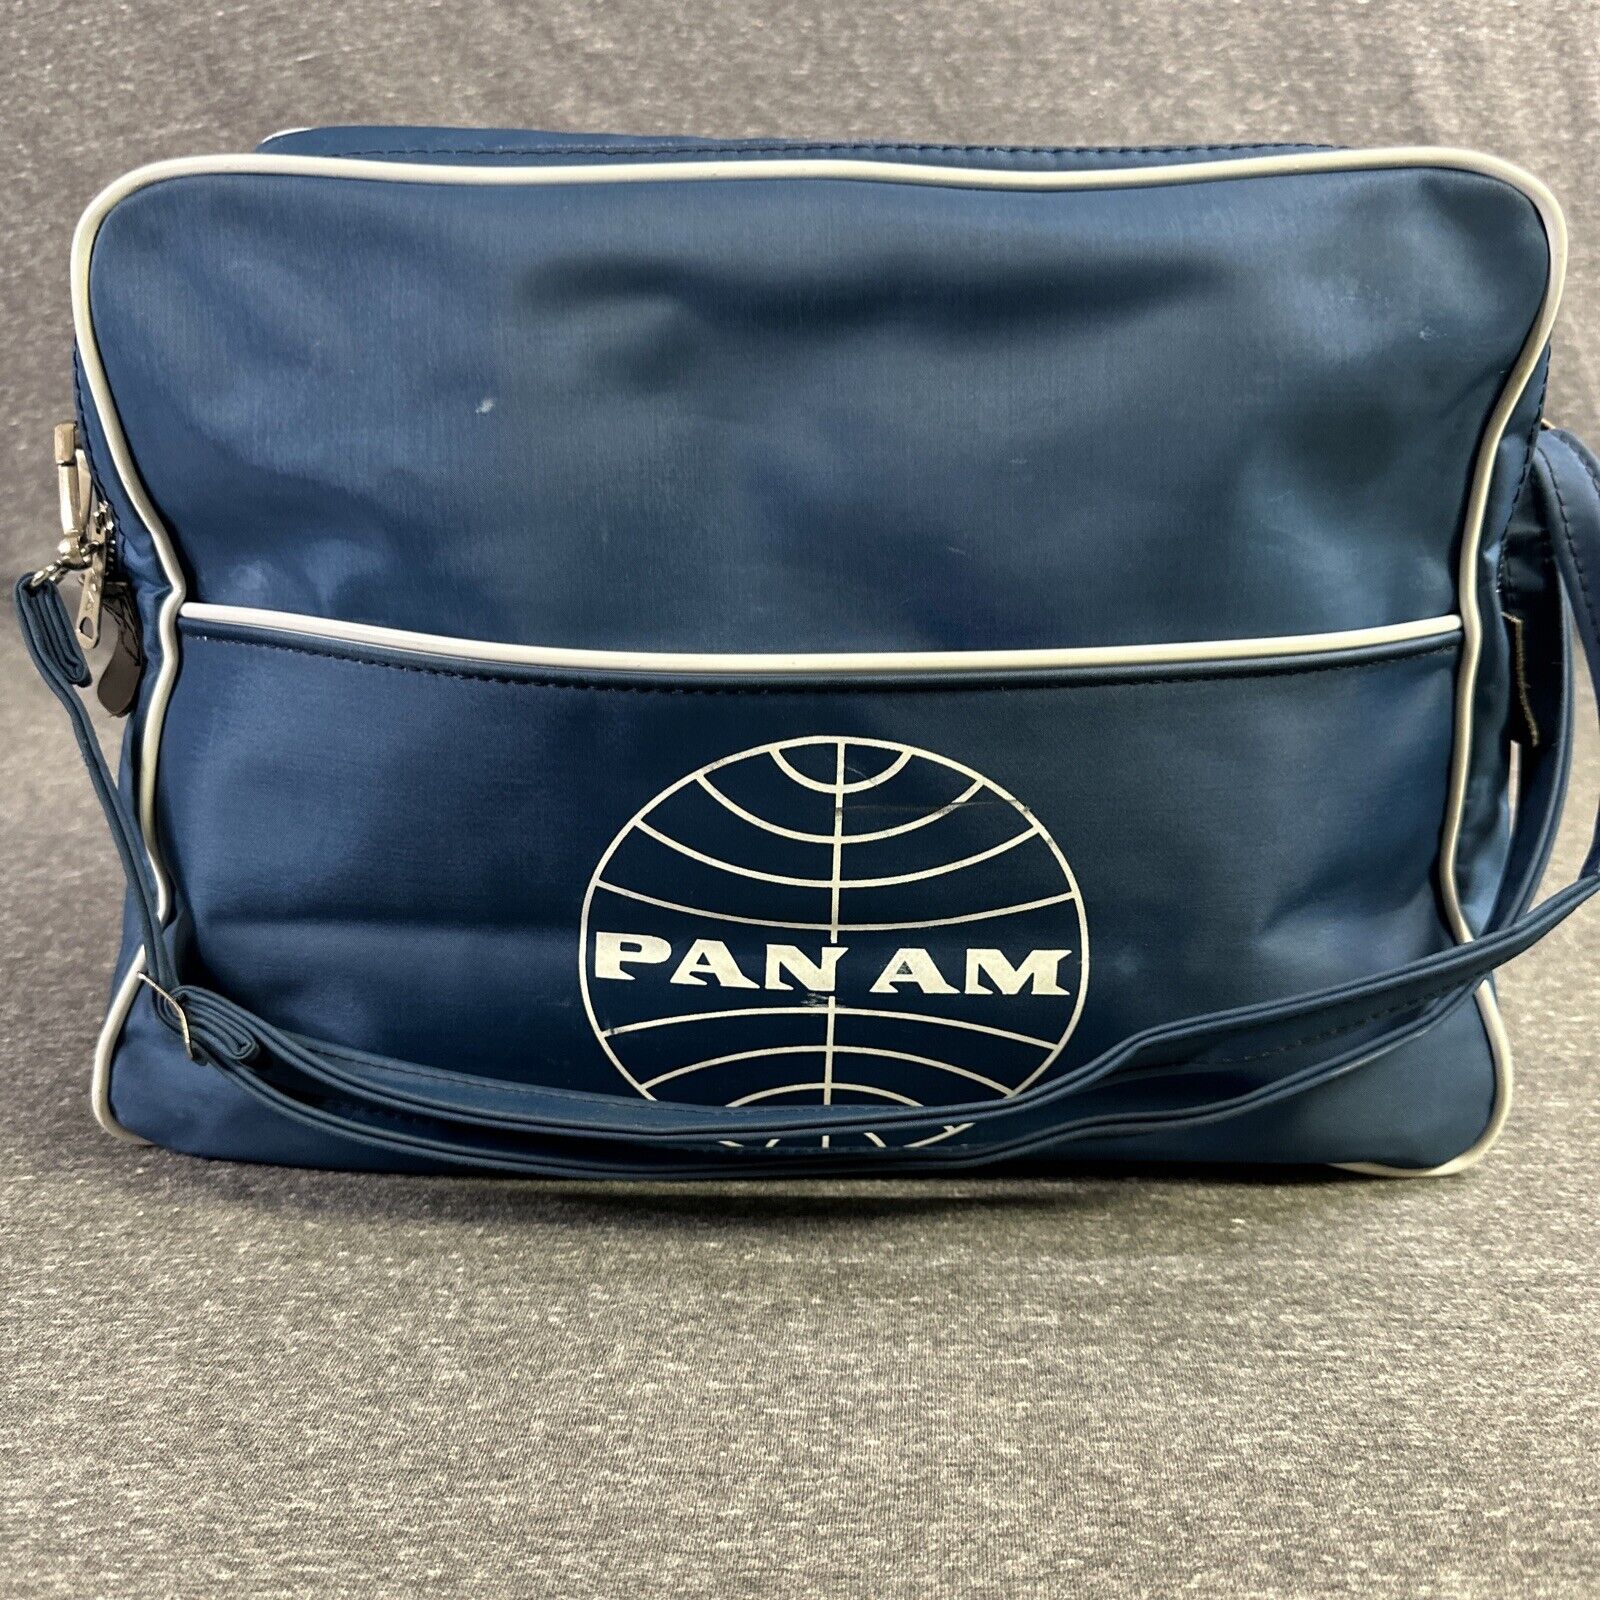 Pan Am Airlines Carry On Bag Shoulder StrapMade Vintage 70’s Luggage Cary Bag